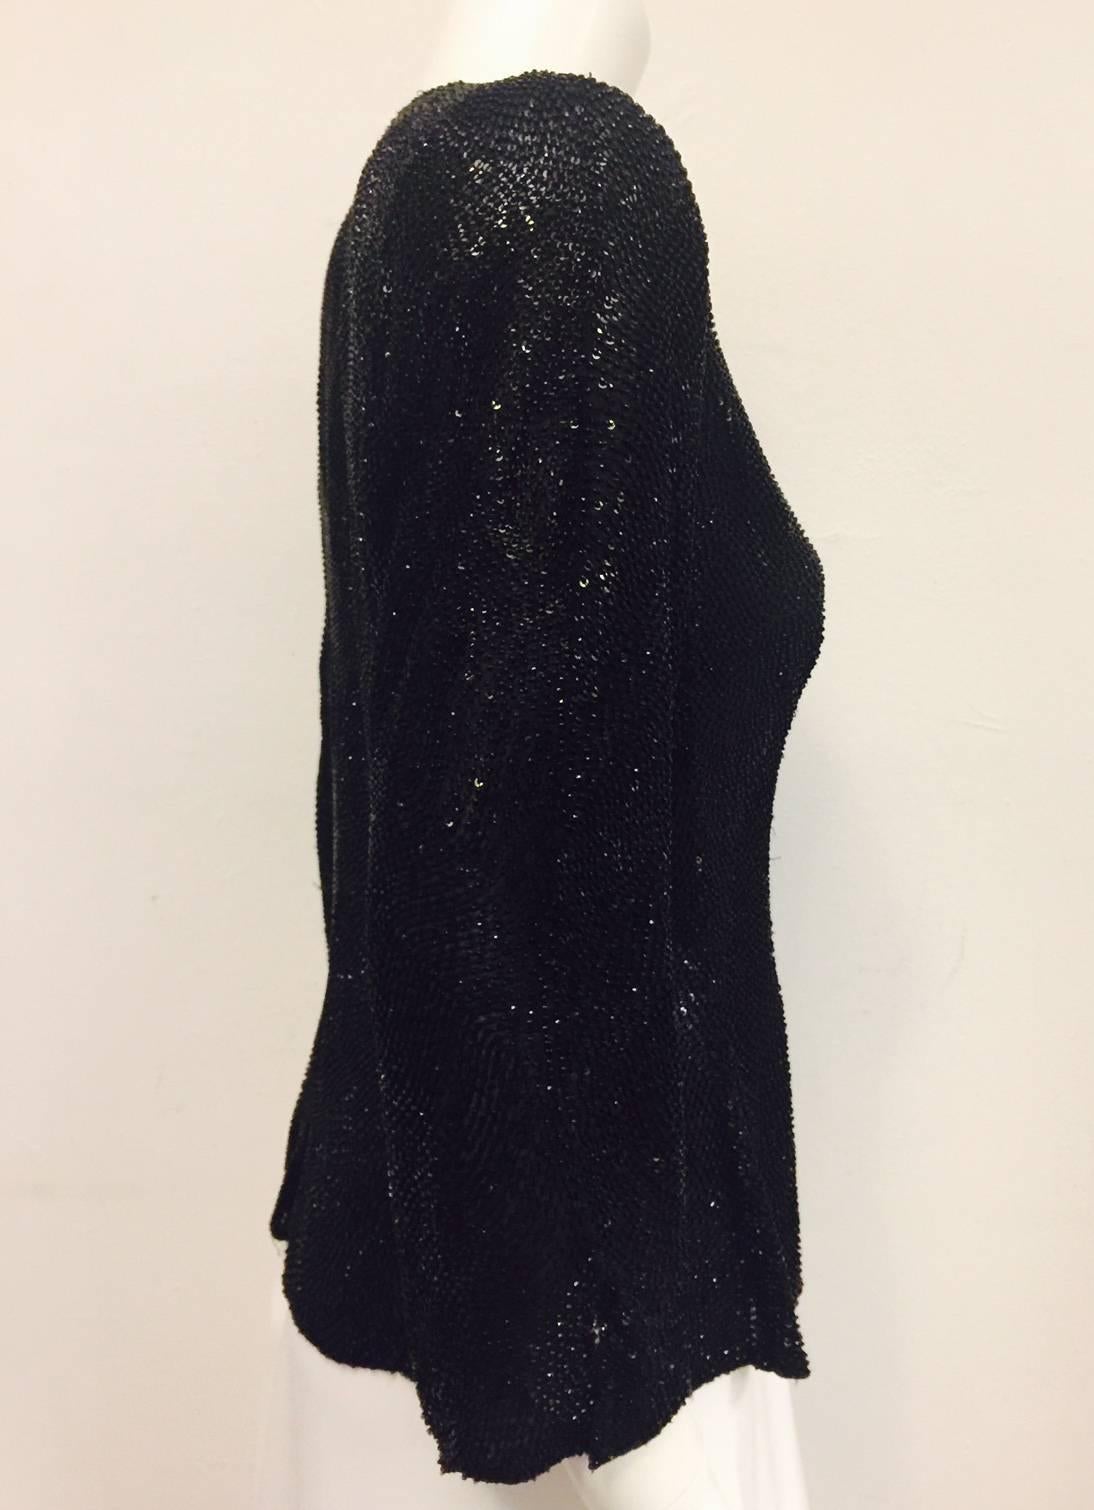 Glamorous Giorgio Armani silk evening jacket is encrusted with black sequins and beads allover.  Signature collar and slit bracelet sleeves.  Fully lined with slightly padded shoulders. Two hidden buttons finish the look.  Wear with everything from